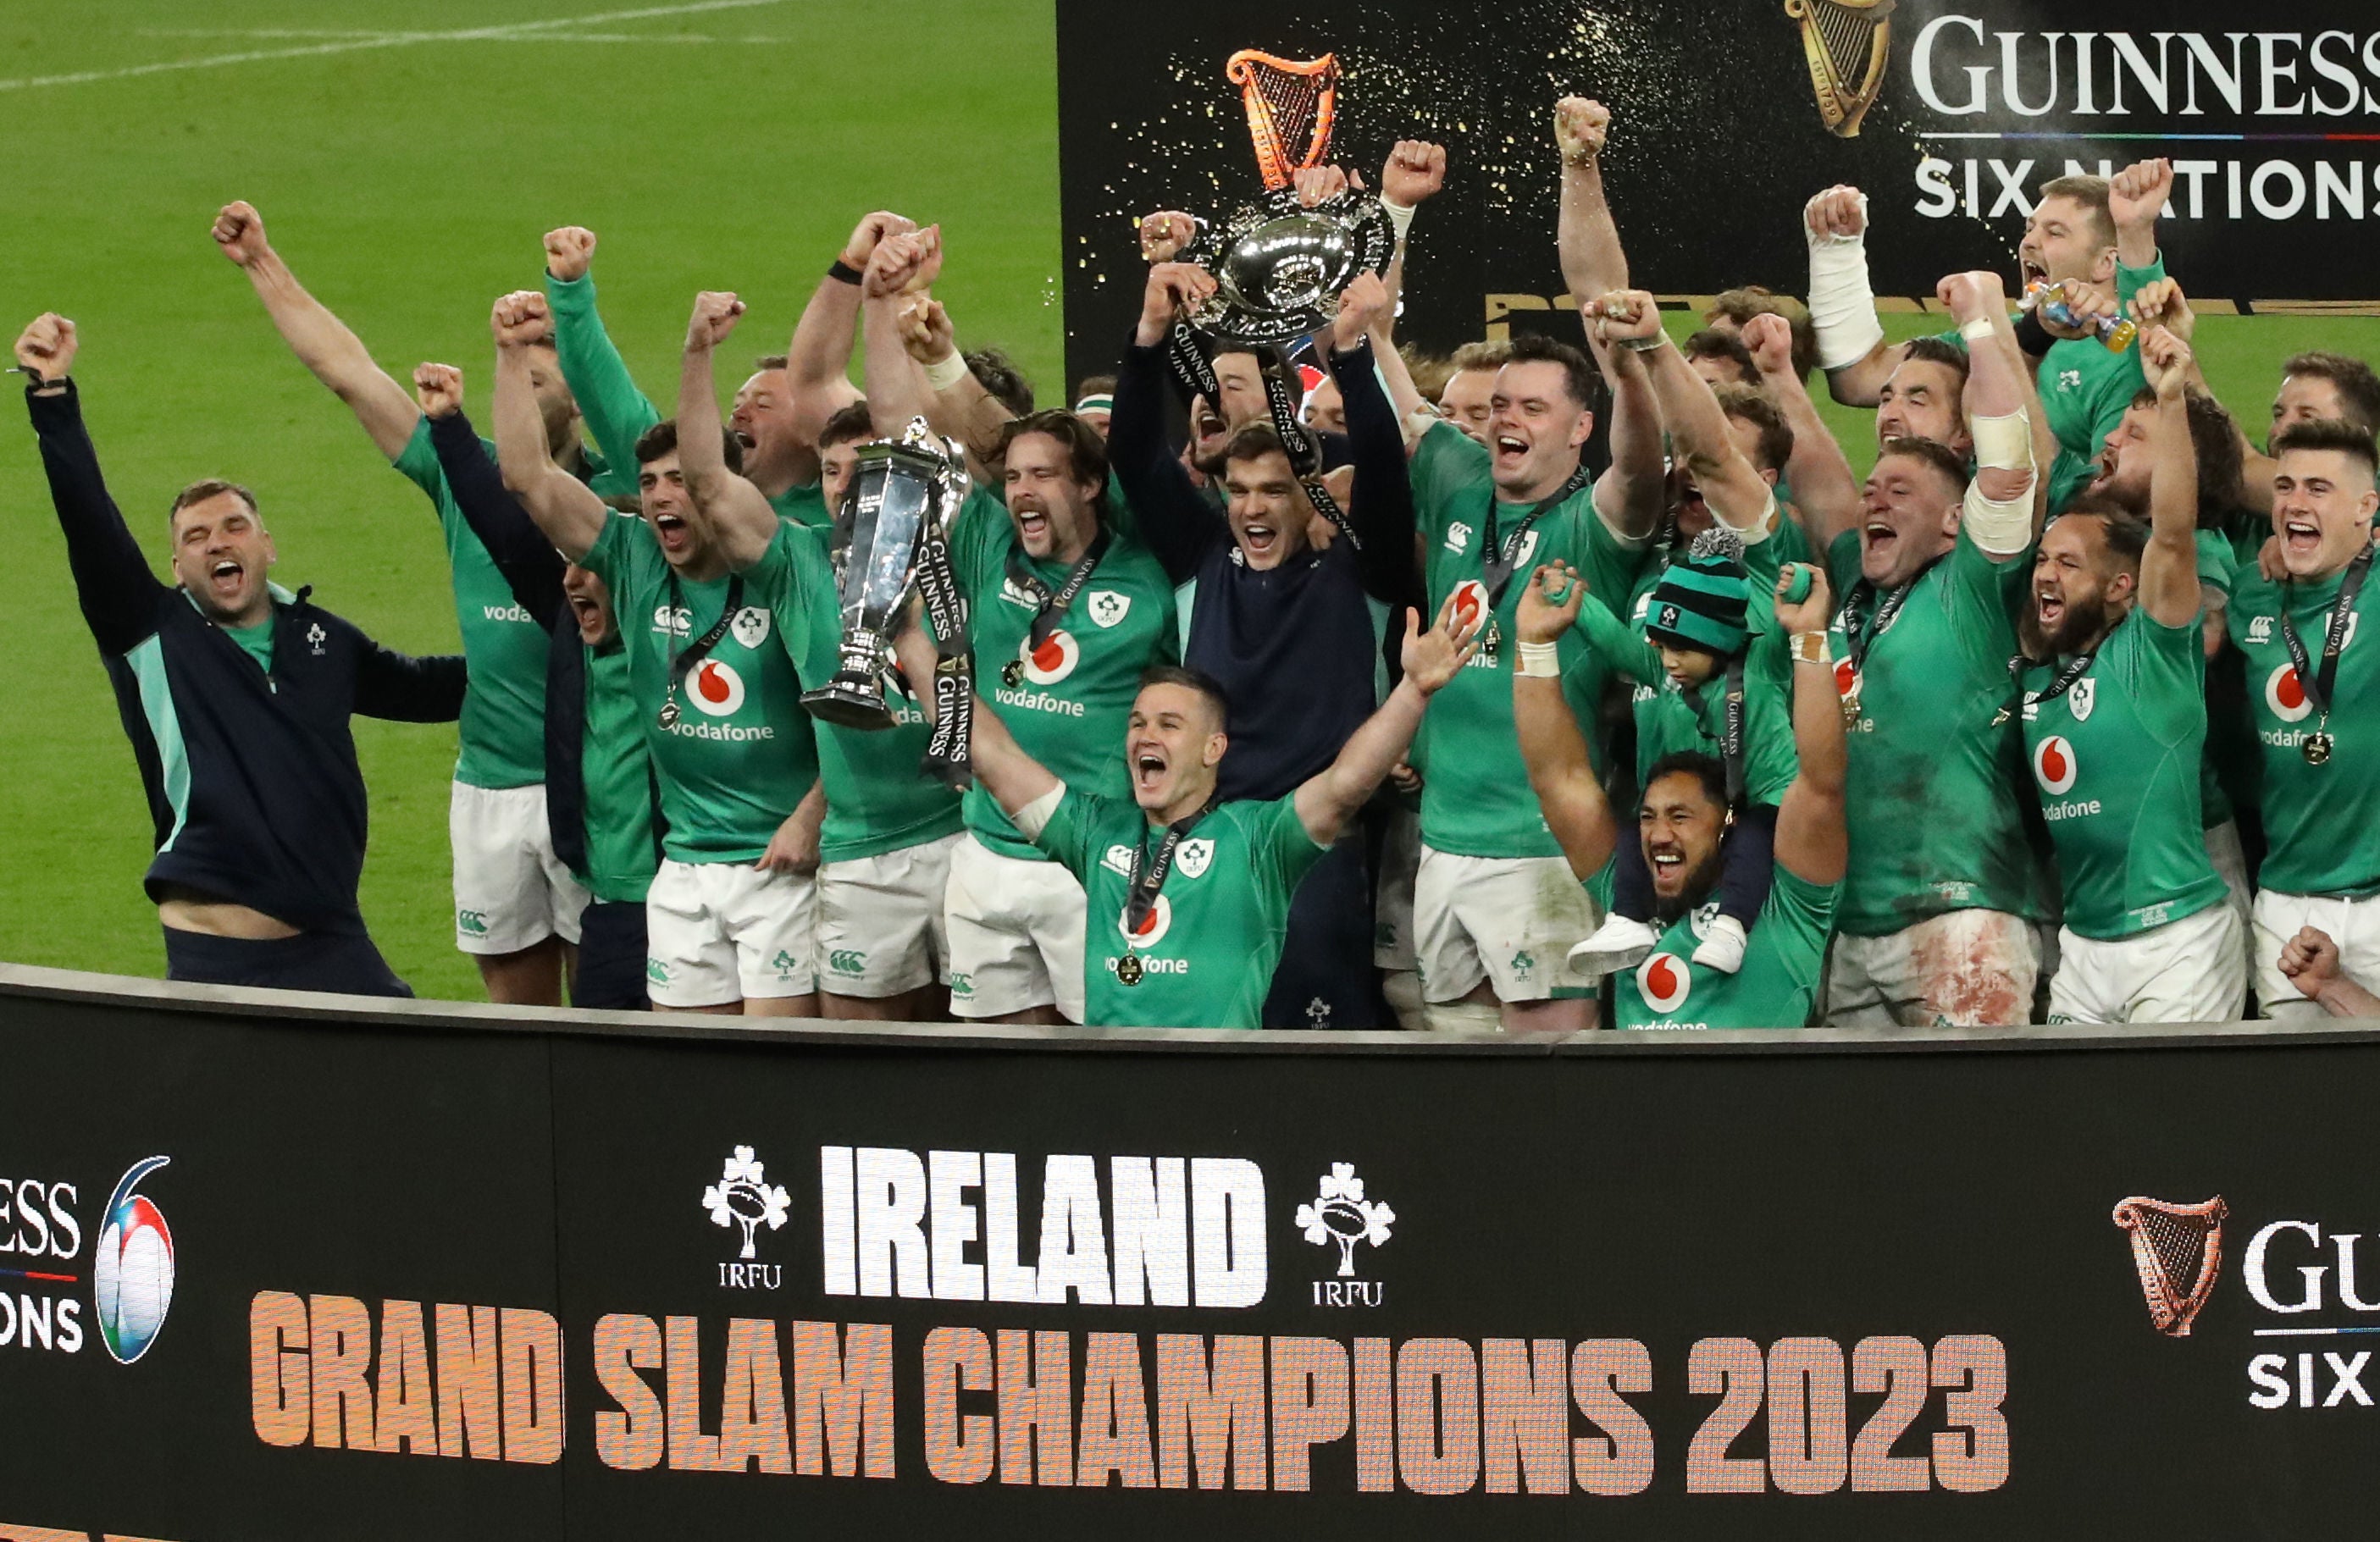 Ireland sealed the grand slam with victory over England in Dublin